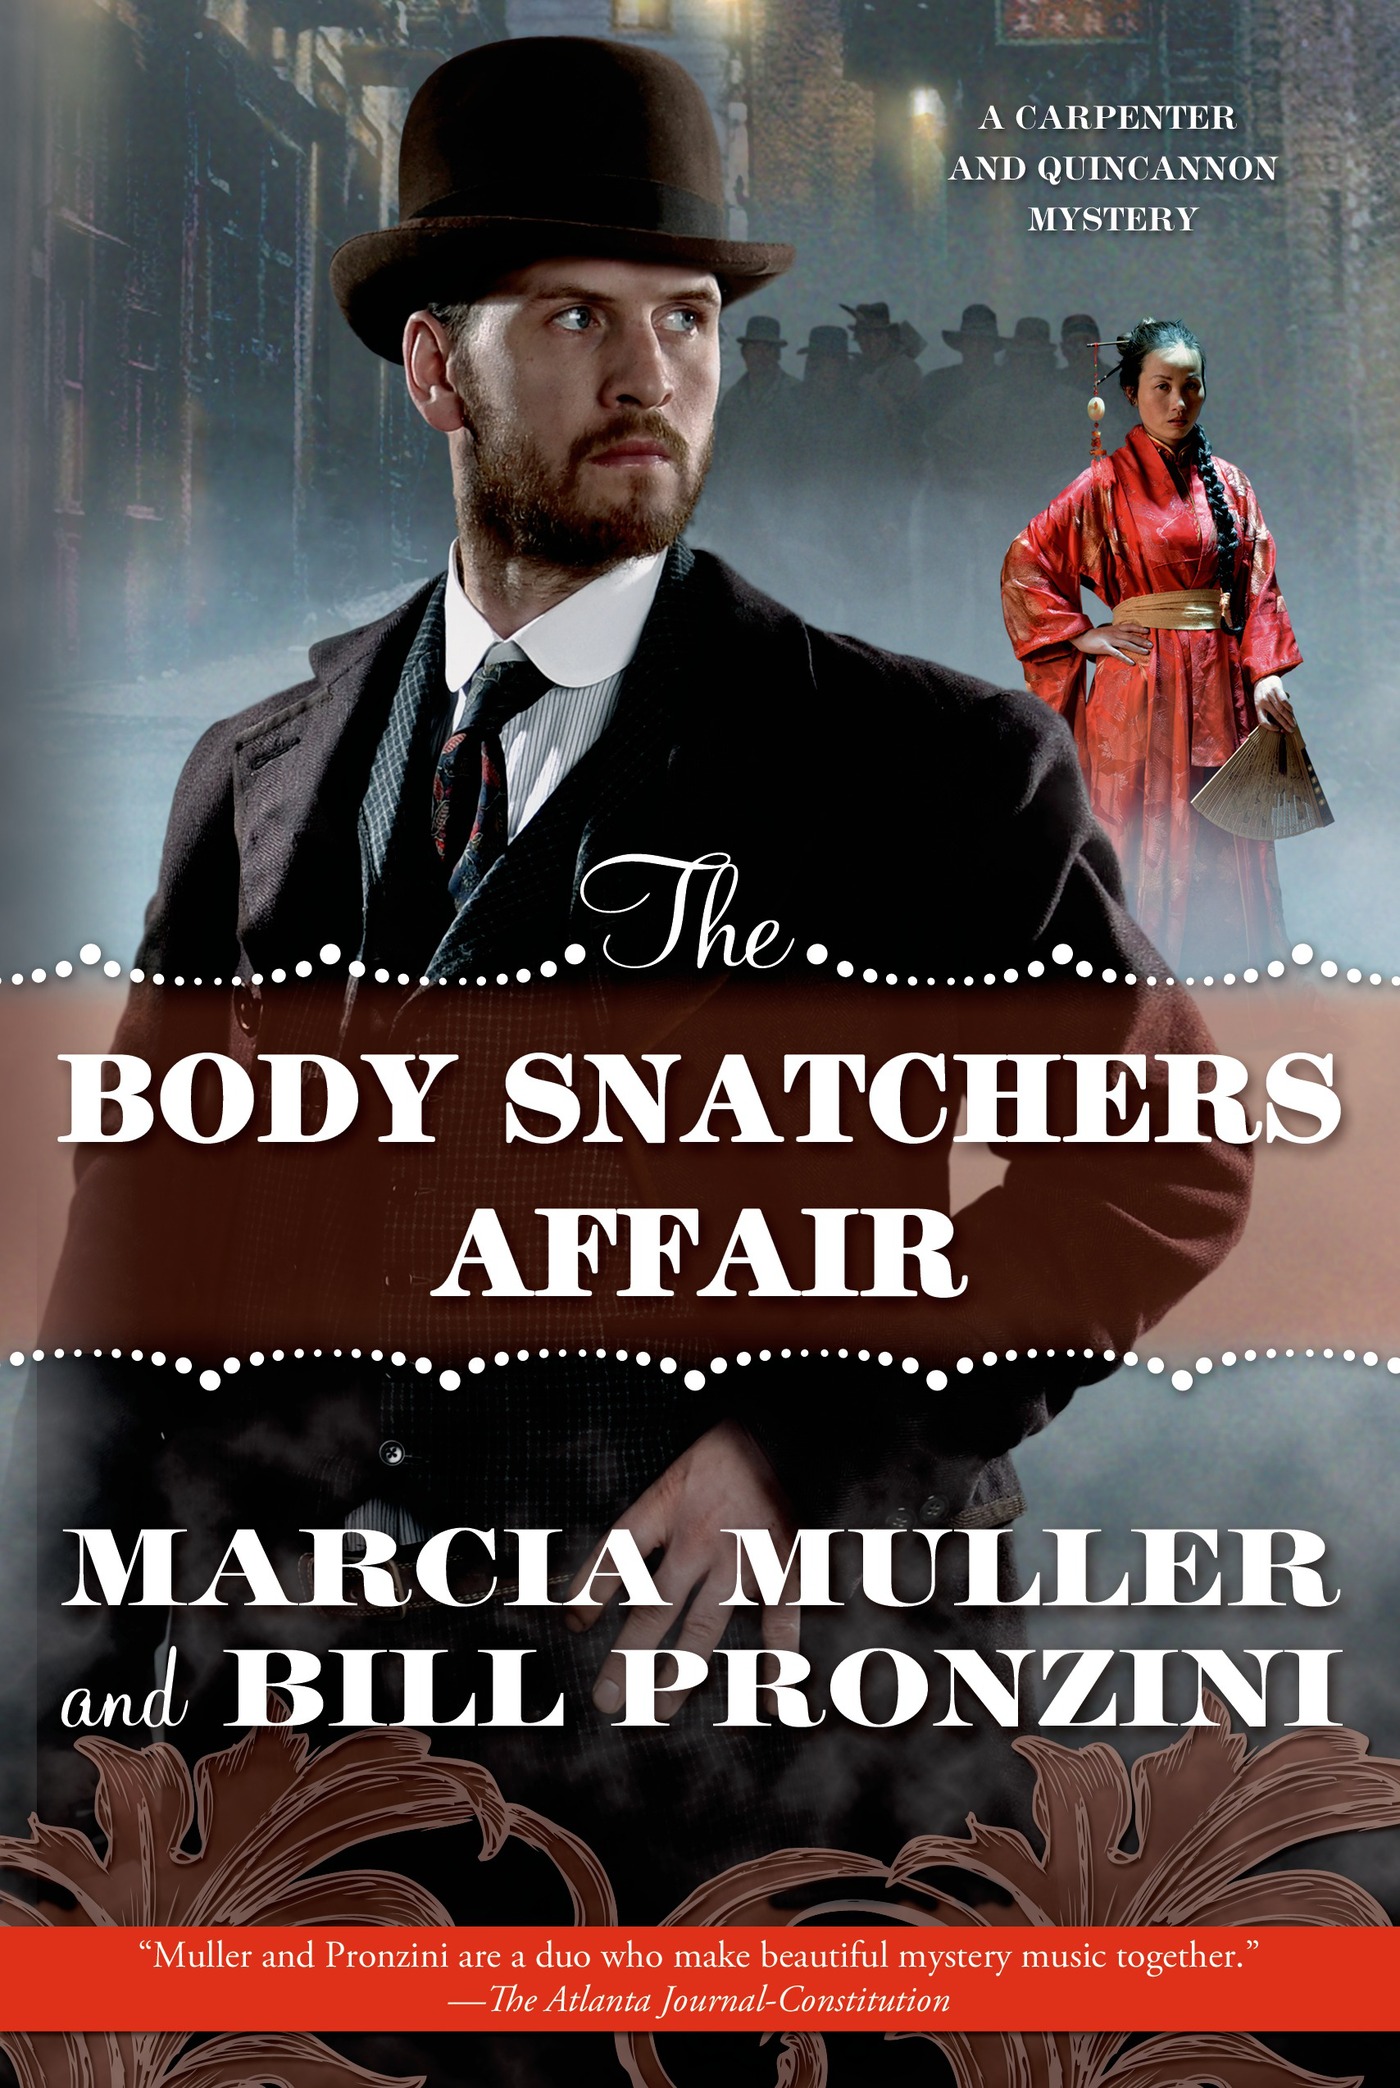 The Body Snatchers Affair : A Carpenter and Quincannon Mystery by Marcia Muller, Bill Pronzini